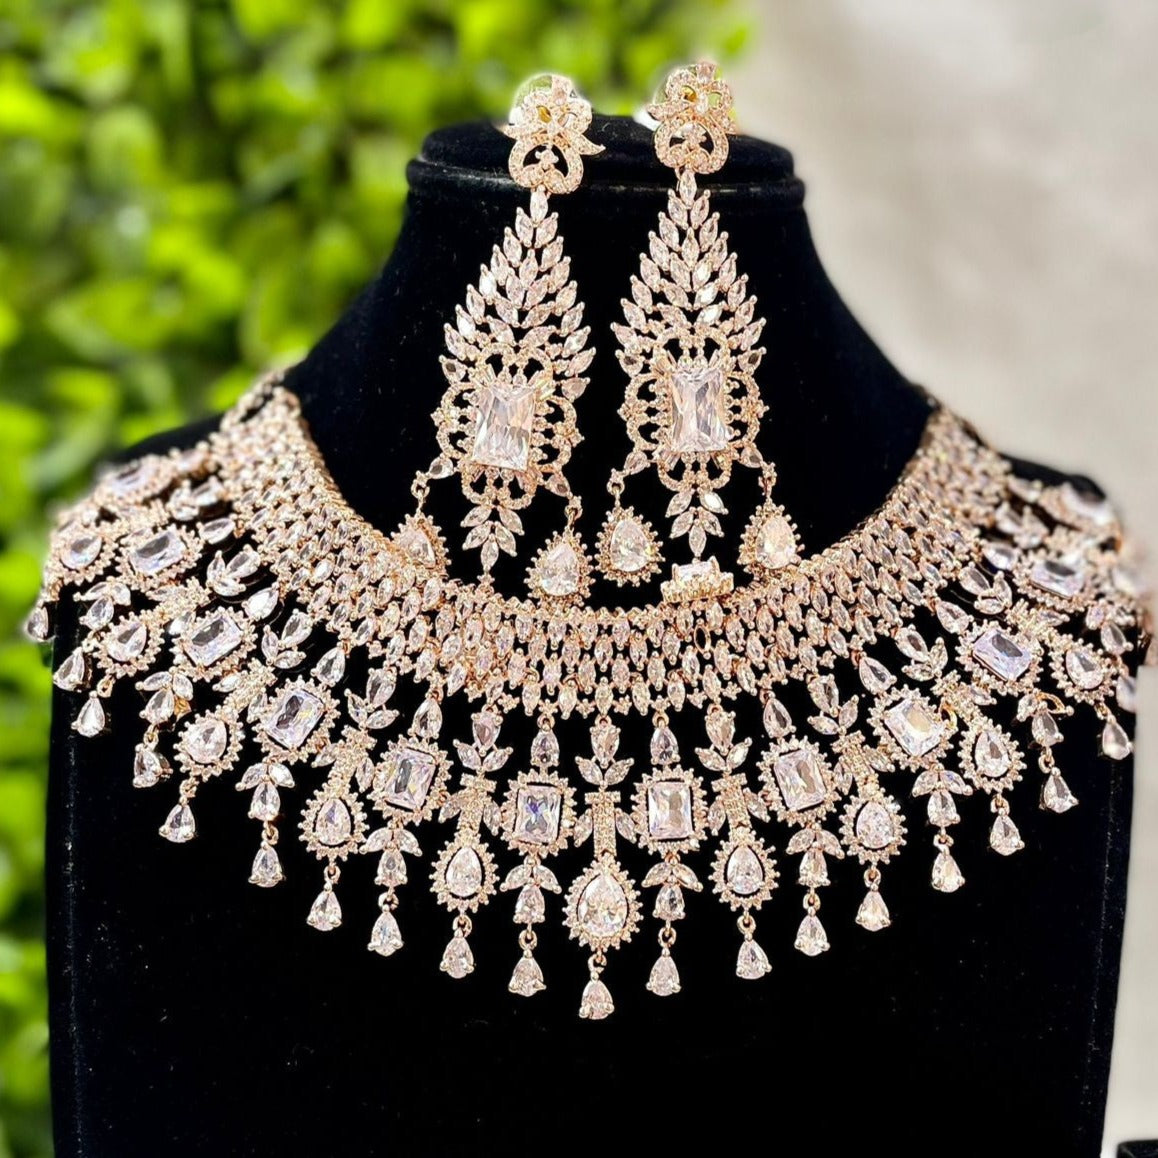 Adaptable Radiance: American Diamond Necklace and Earrings Full Flexible Jewelry Set